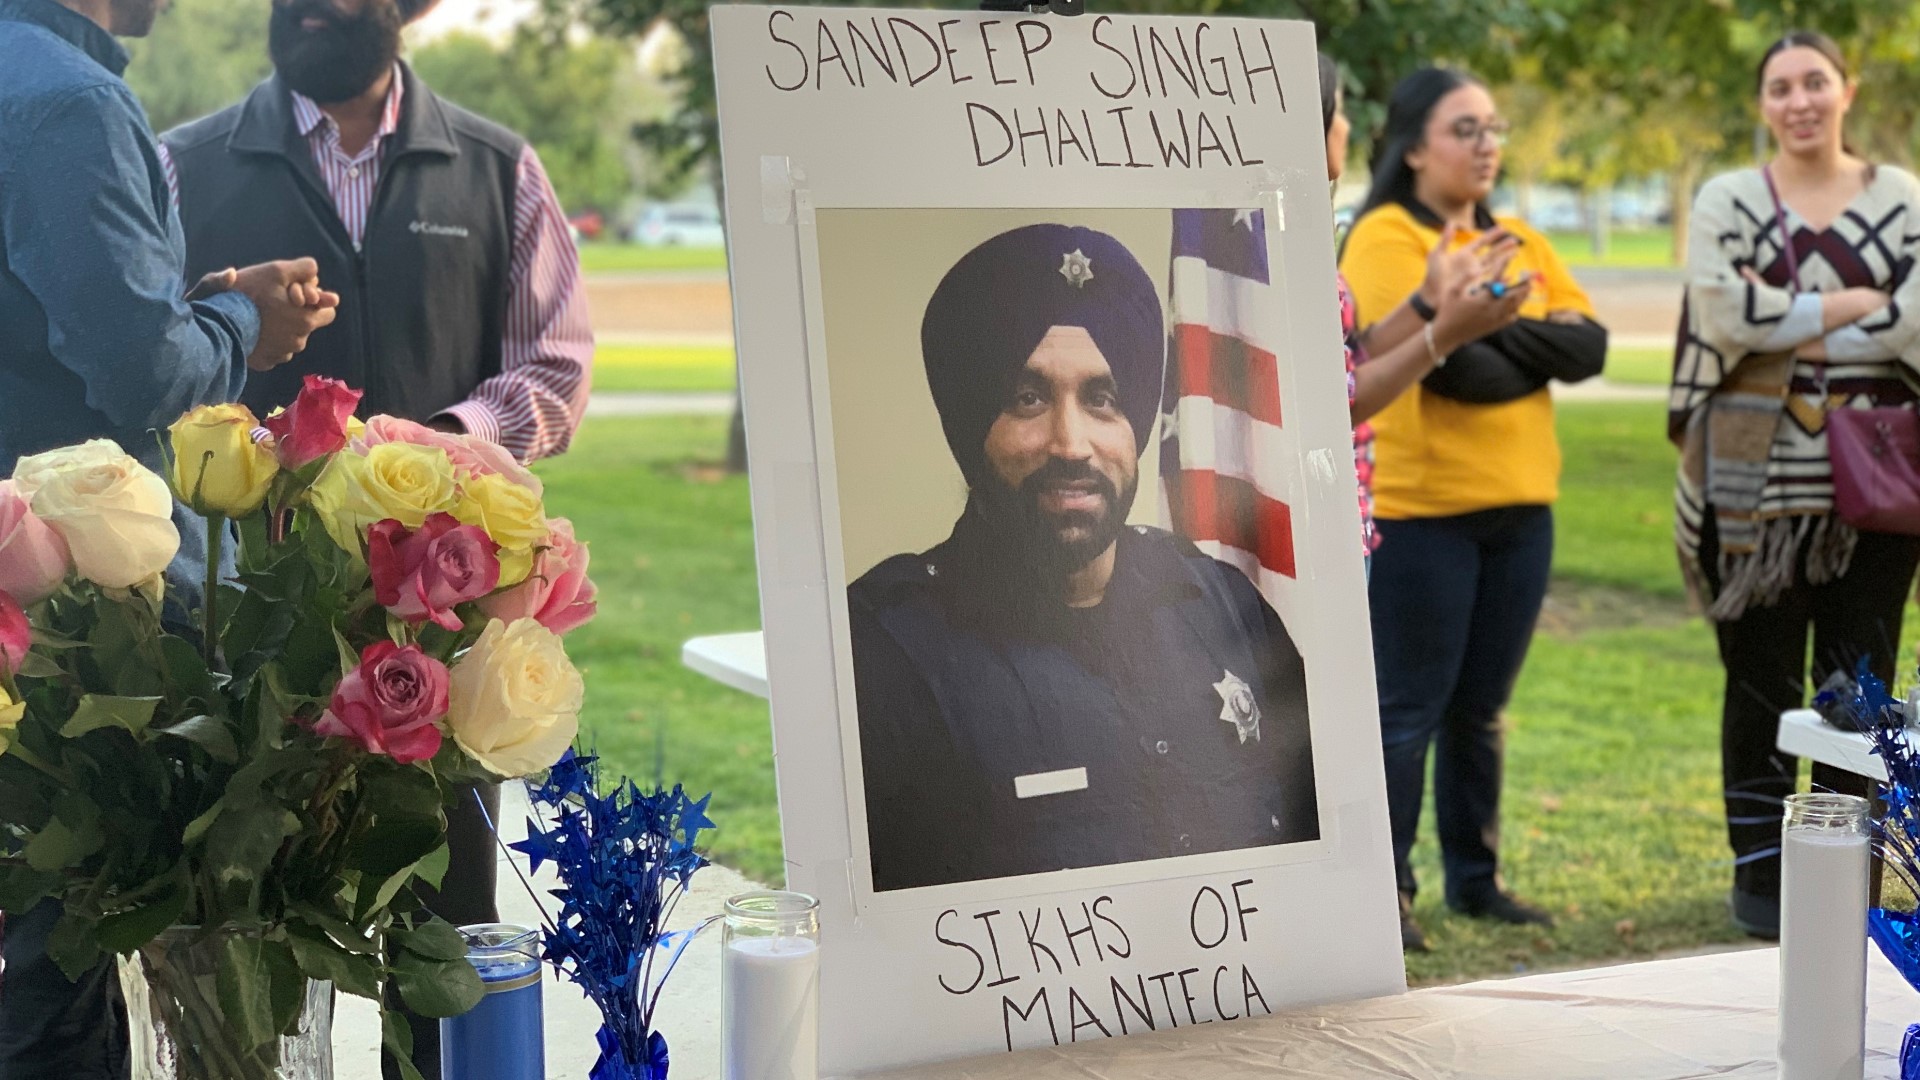 The Sikh community in San Joaquin County organized a candlelight vigil for Sandeep Dhaliwal, a Texas deputy sheriff shot and killed last week.